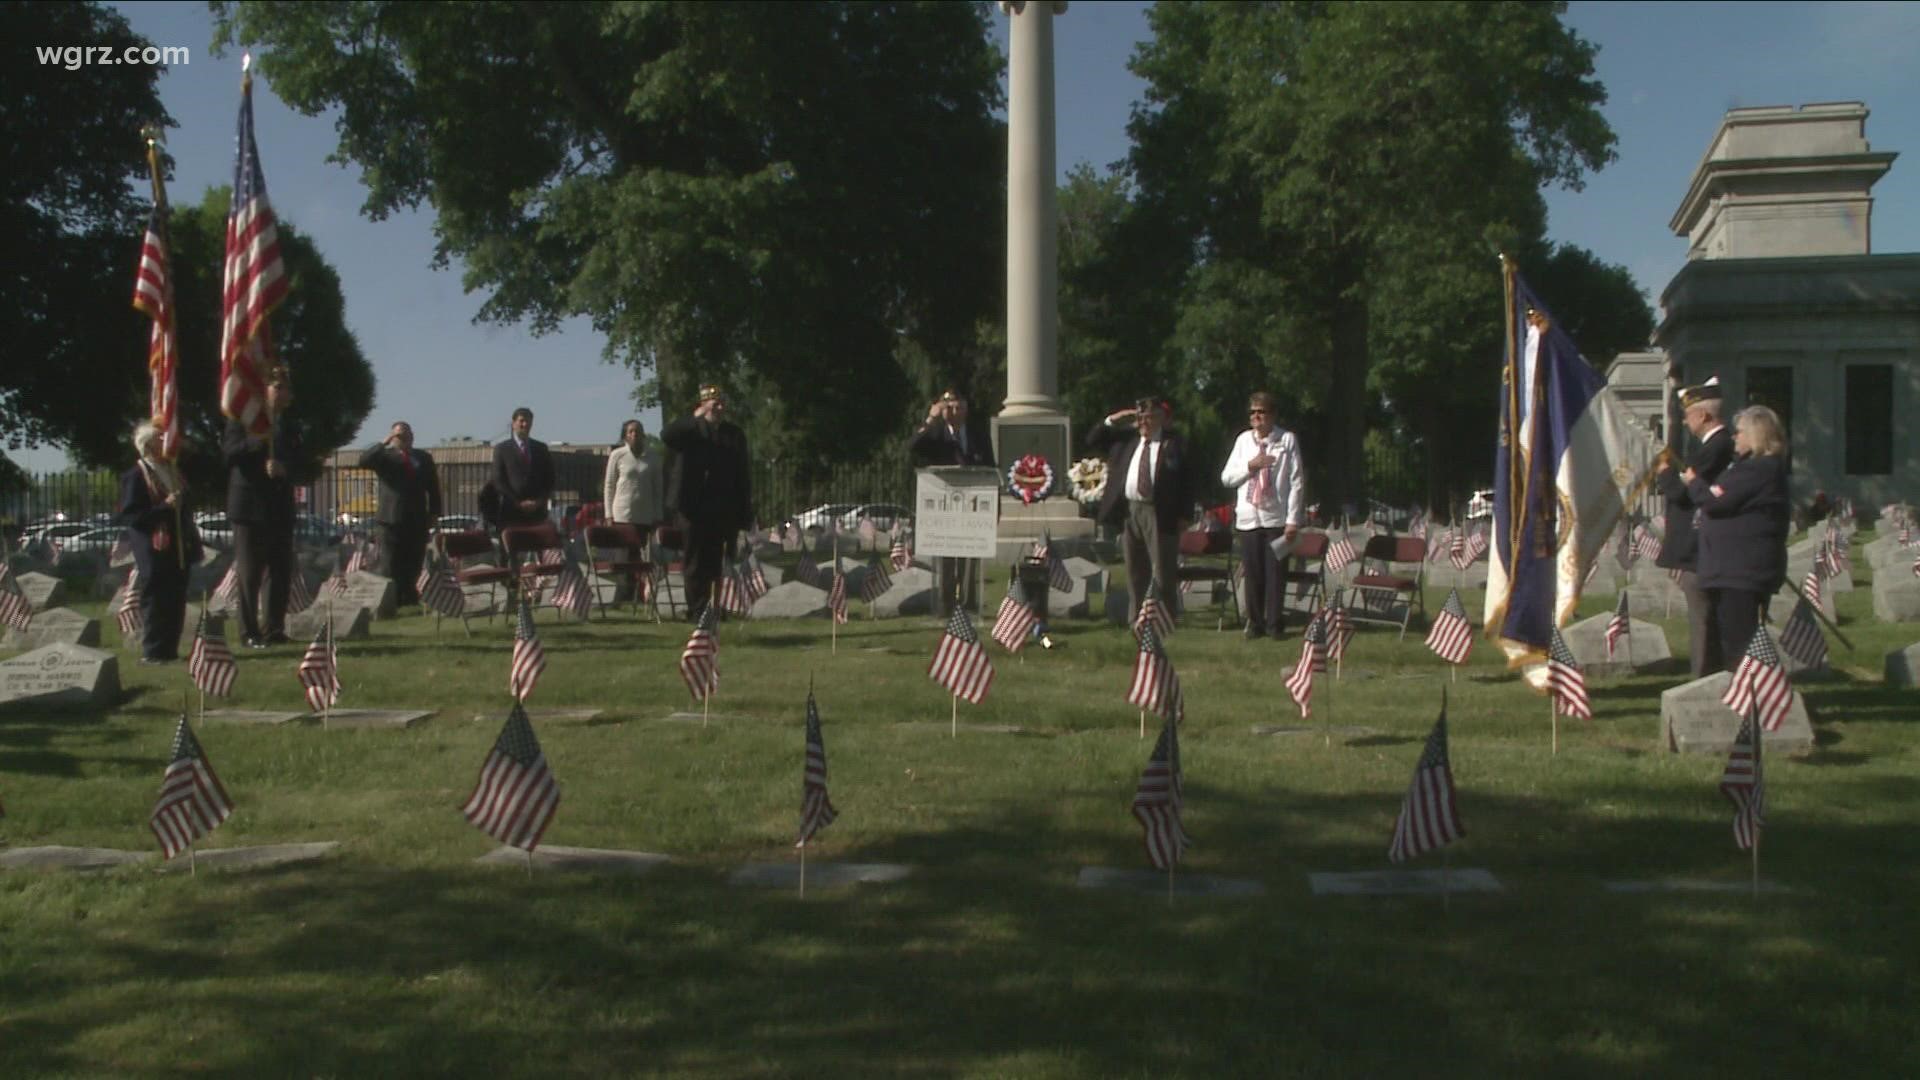 Several veterans organizations and Forest Lawn Cemetery will honor those who died while fighting for our freedom